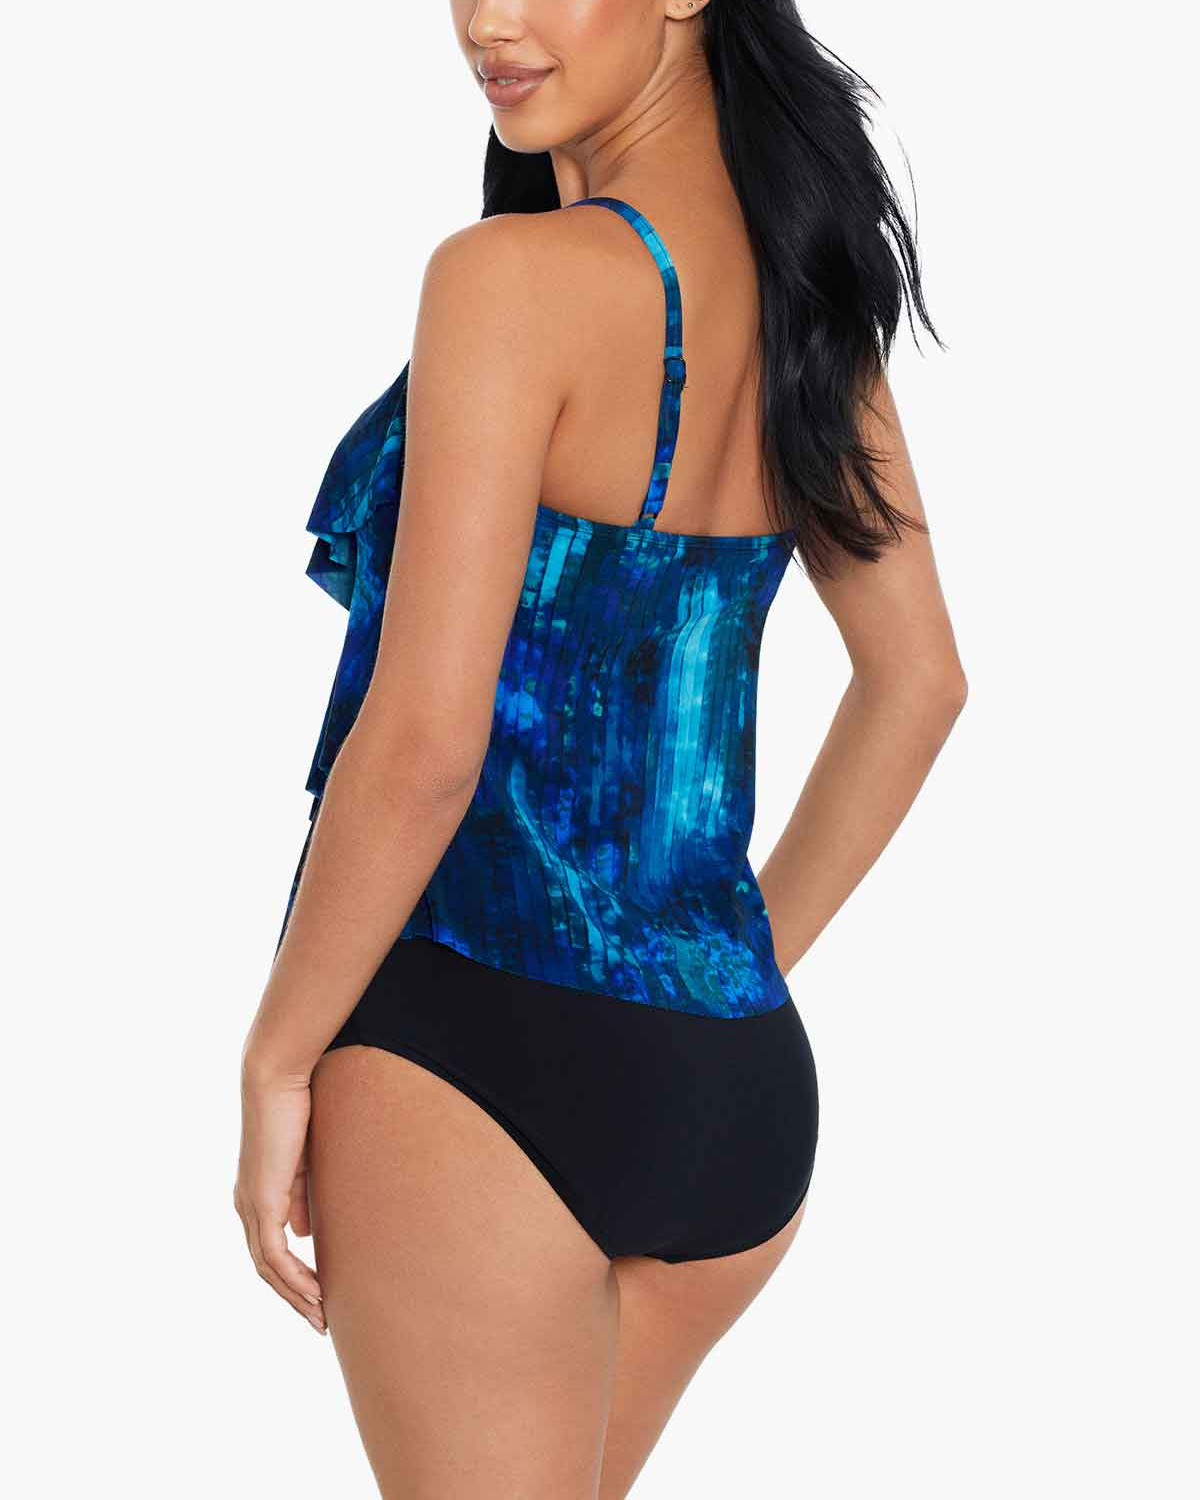 Model wearing a ruffle tankini top in an abstract blue, navy and white print top